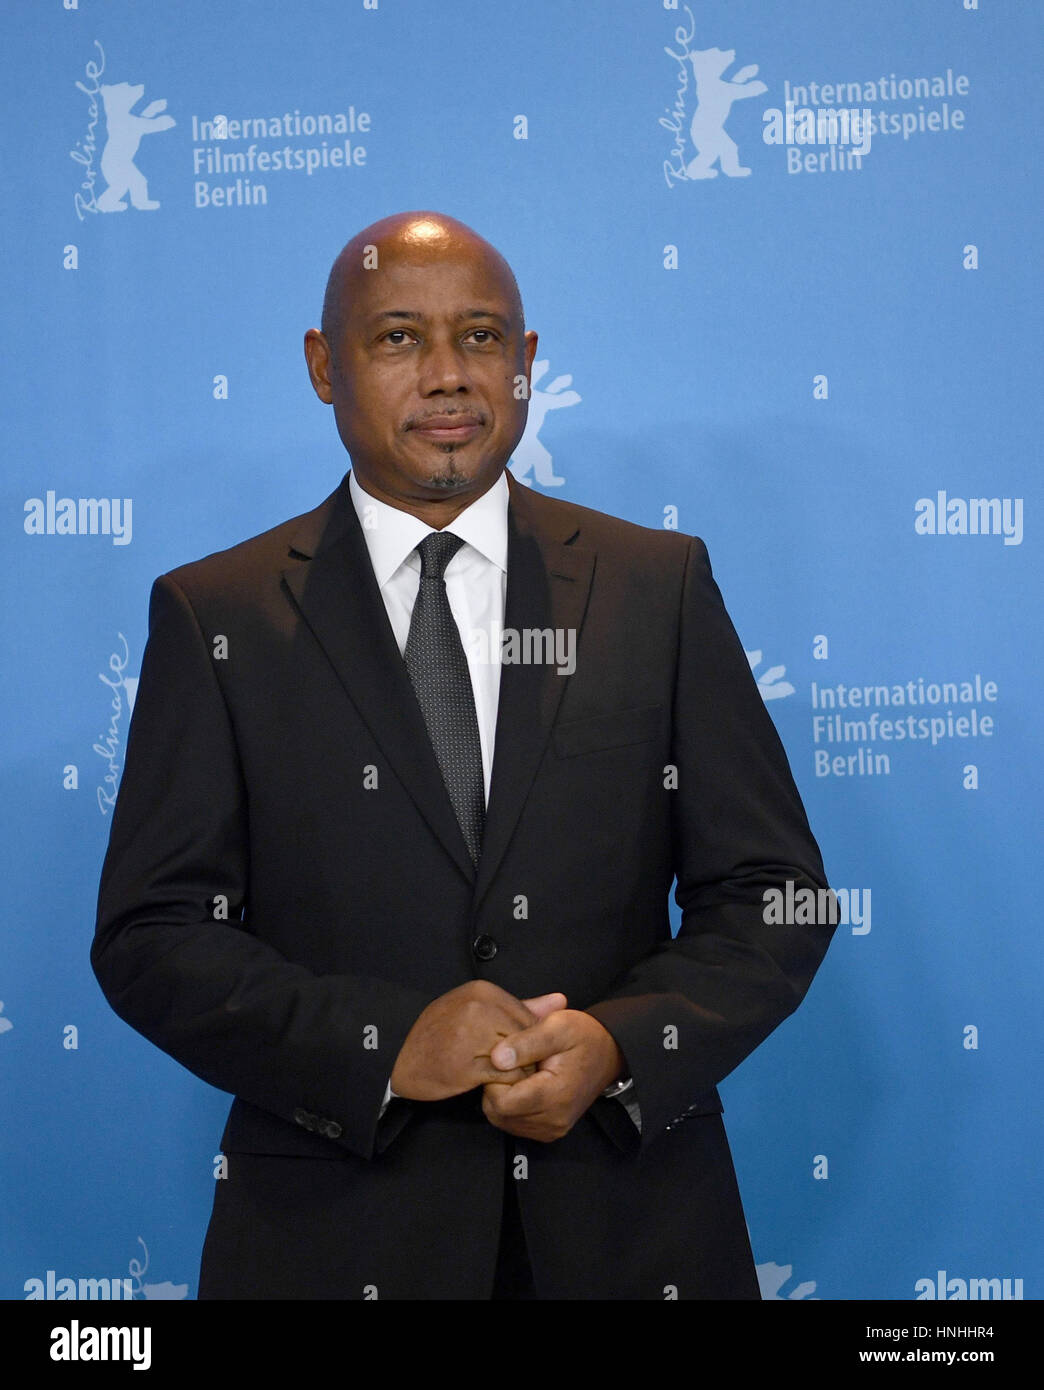 Berlin, Germany. 12th Feb, 2017. The director Raoul Peck arrives for the photo call of the film 'The Young Karl Marx' at the 67th International film festival in Berlin, Germany, 12 February 2017. The film will be aired in the section 'Berlinale Special'. Photo: Monika Skolimowska/dpa/Alamy Live News Stock Photo